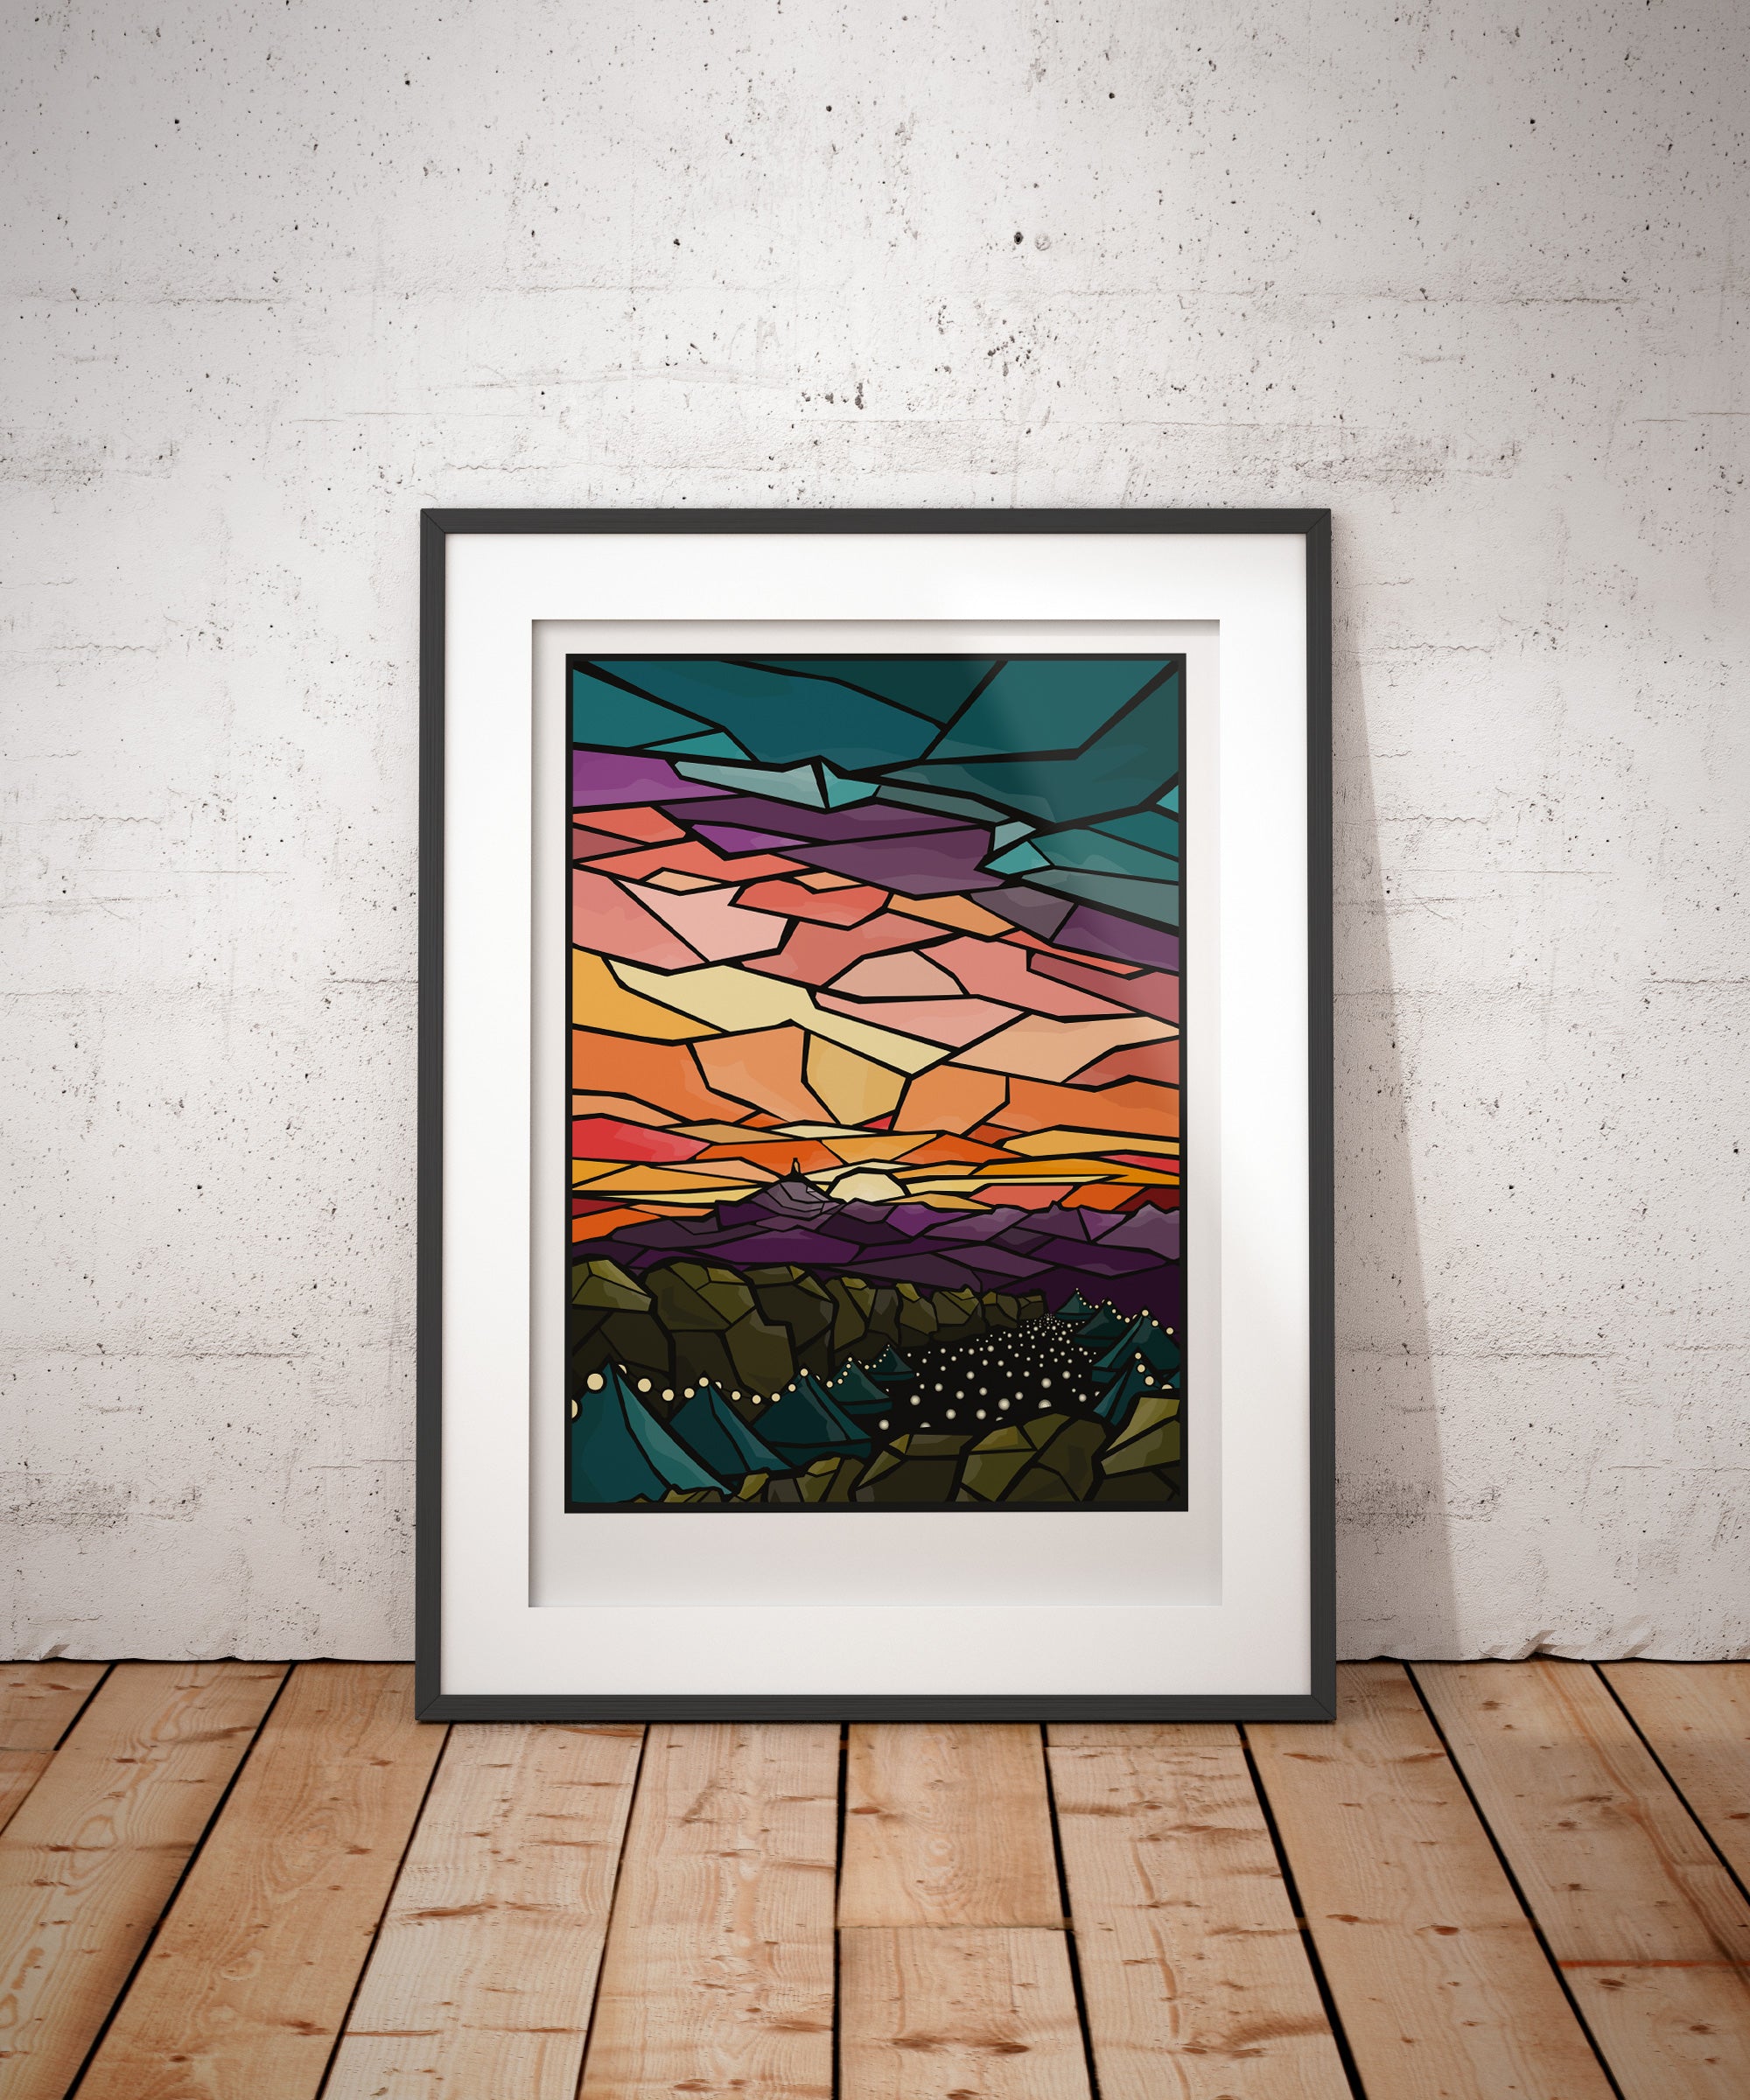 Glastonbury Festival Stained Glass Poster Print